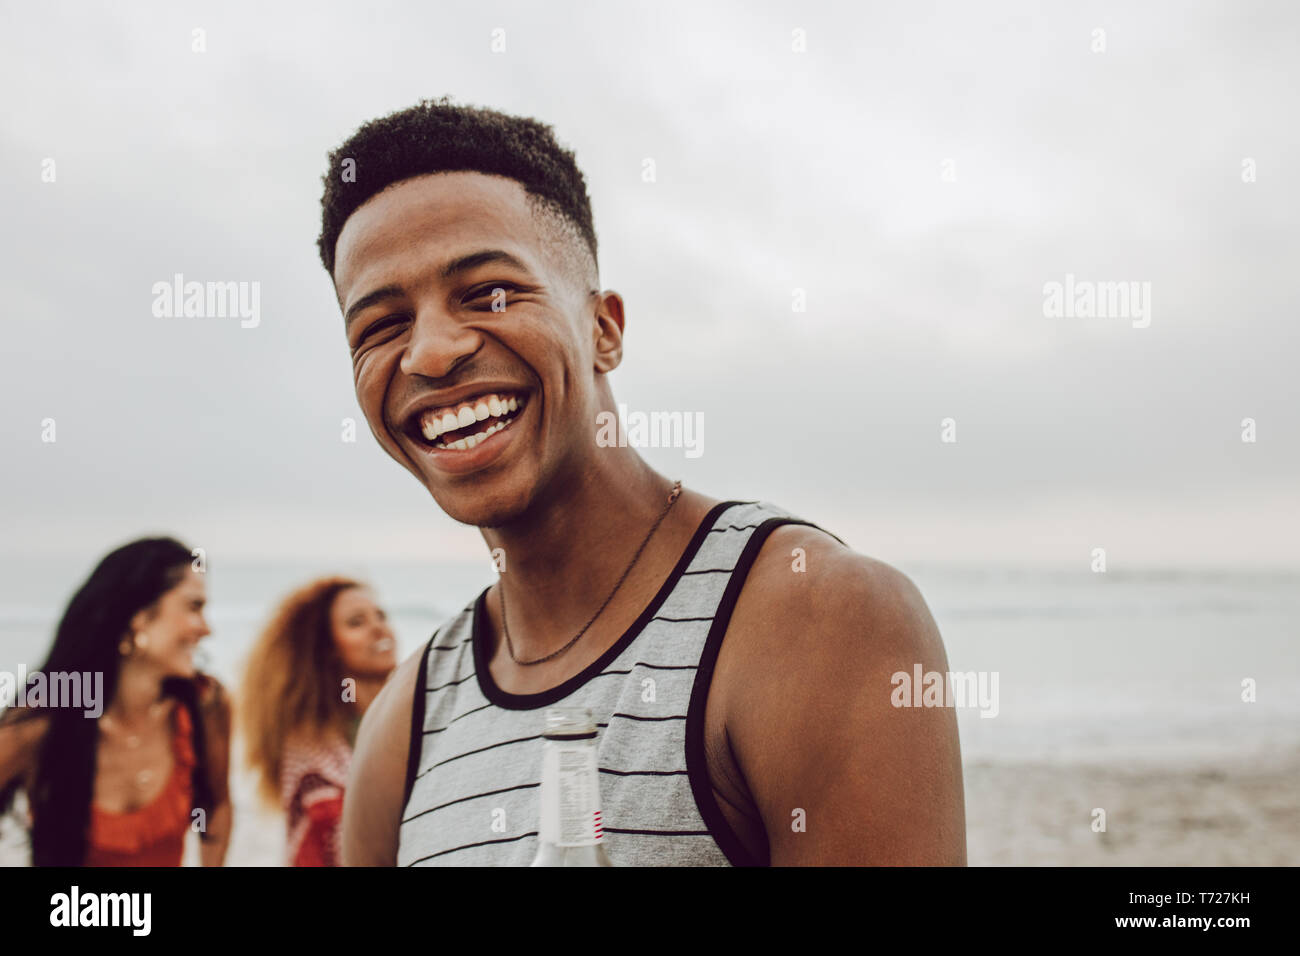 Handsome young african man on the beach with friends at the back. Smiling male standing at the beach with group of friends in background. Stock Photo